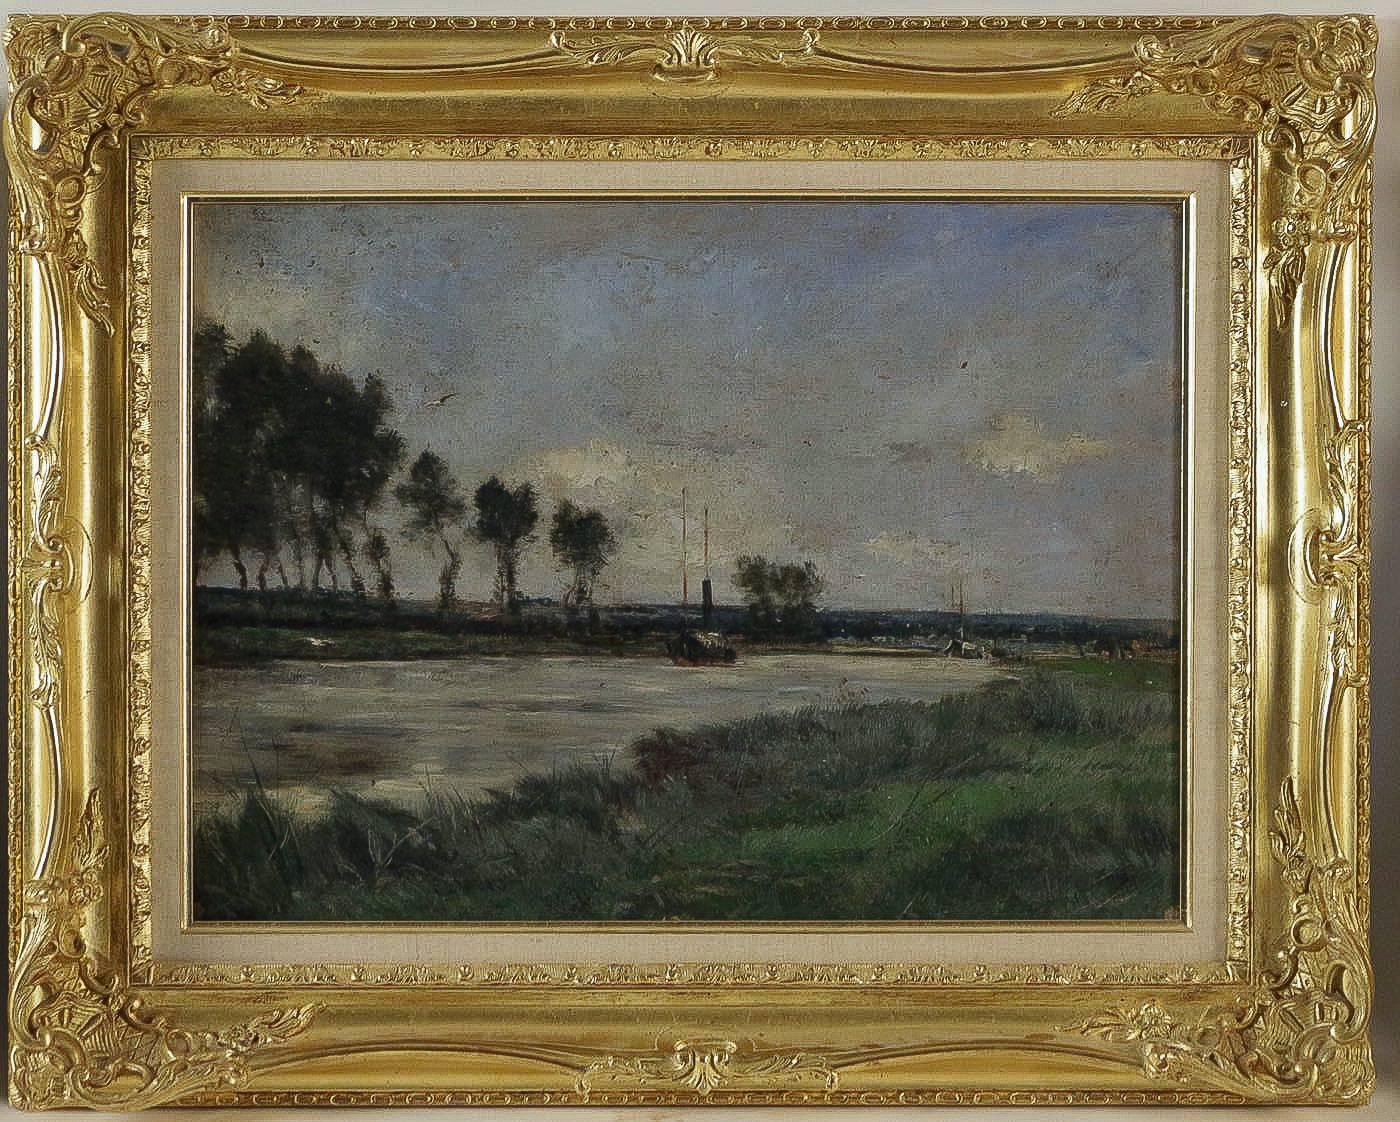 We are pleased to present you a lovely Barbizon School, oil on cardboard depicting a river and boat landscape, in a beautiful and ornamental giltwood frame. 

Size unframed : W 20.07 In. - H 14.96 In.
Size with frame: W 25.59 In. - H 20.47 In.

Our